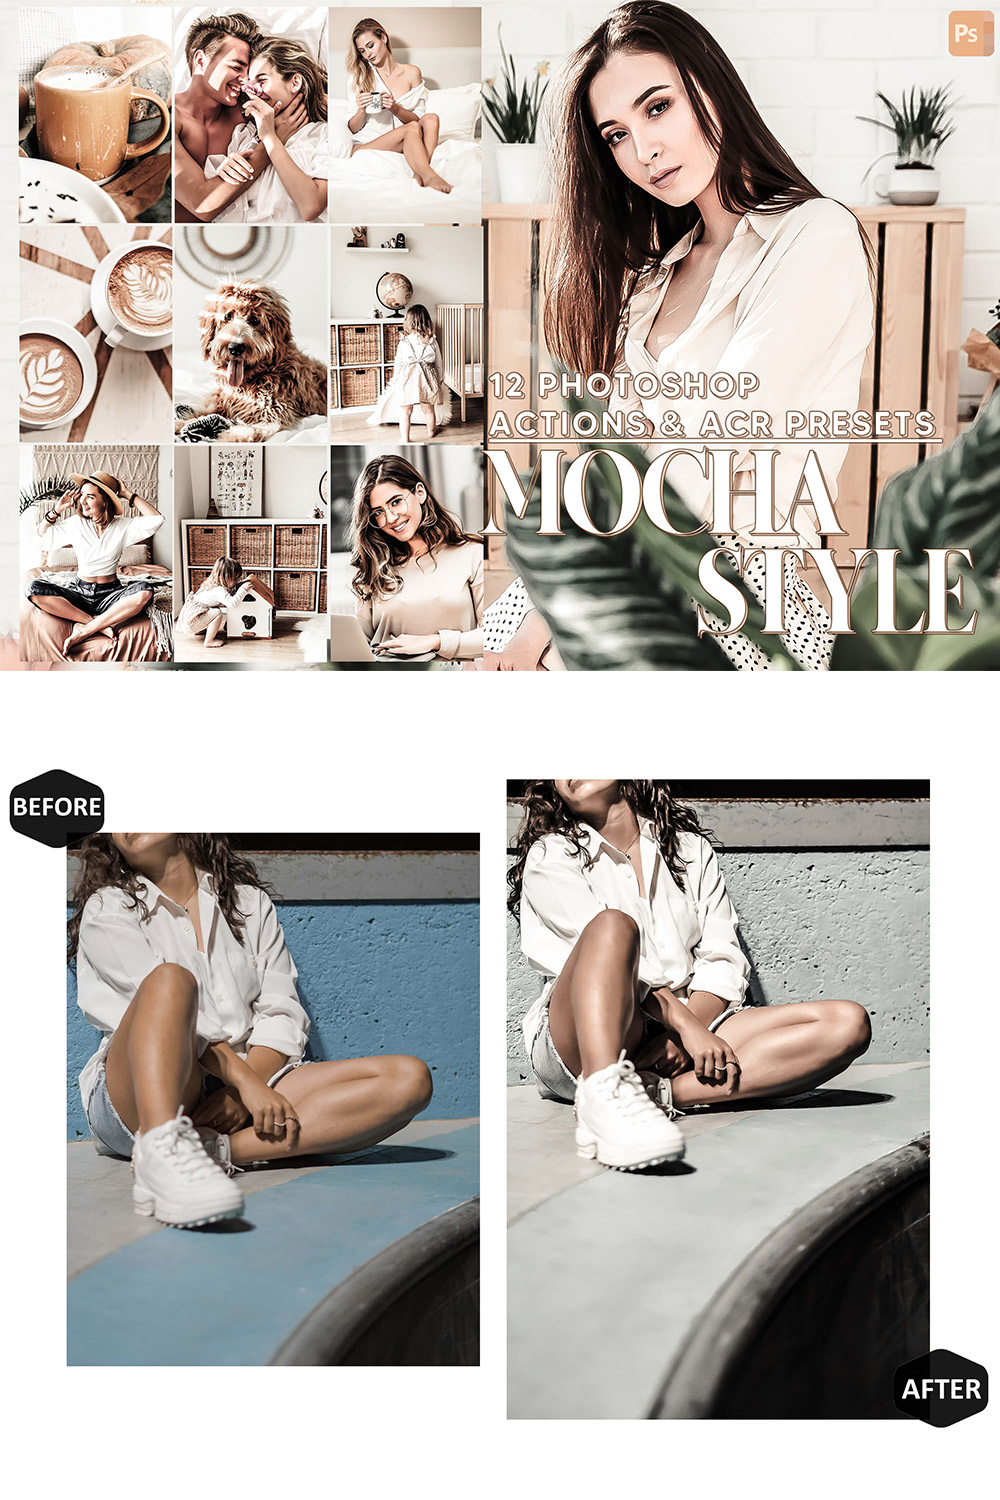 12 Photoshop Actions, Mocha Style Ps Action, Brown ACR Preset, Chocolate Ps Filter, Atn Portrait And Lifestyle Theme For Instagram, Blogger pinterest preview image.